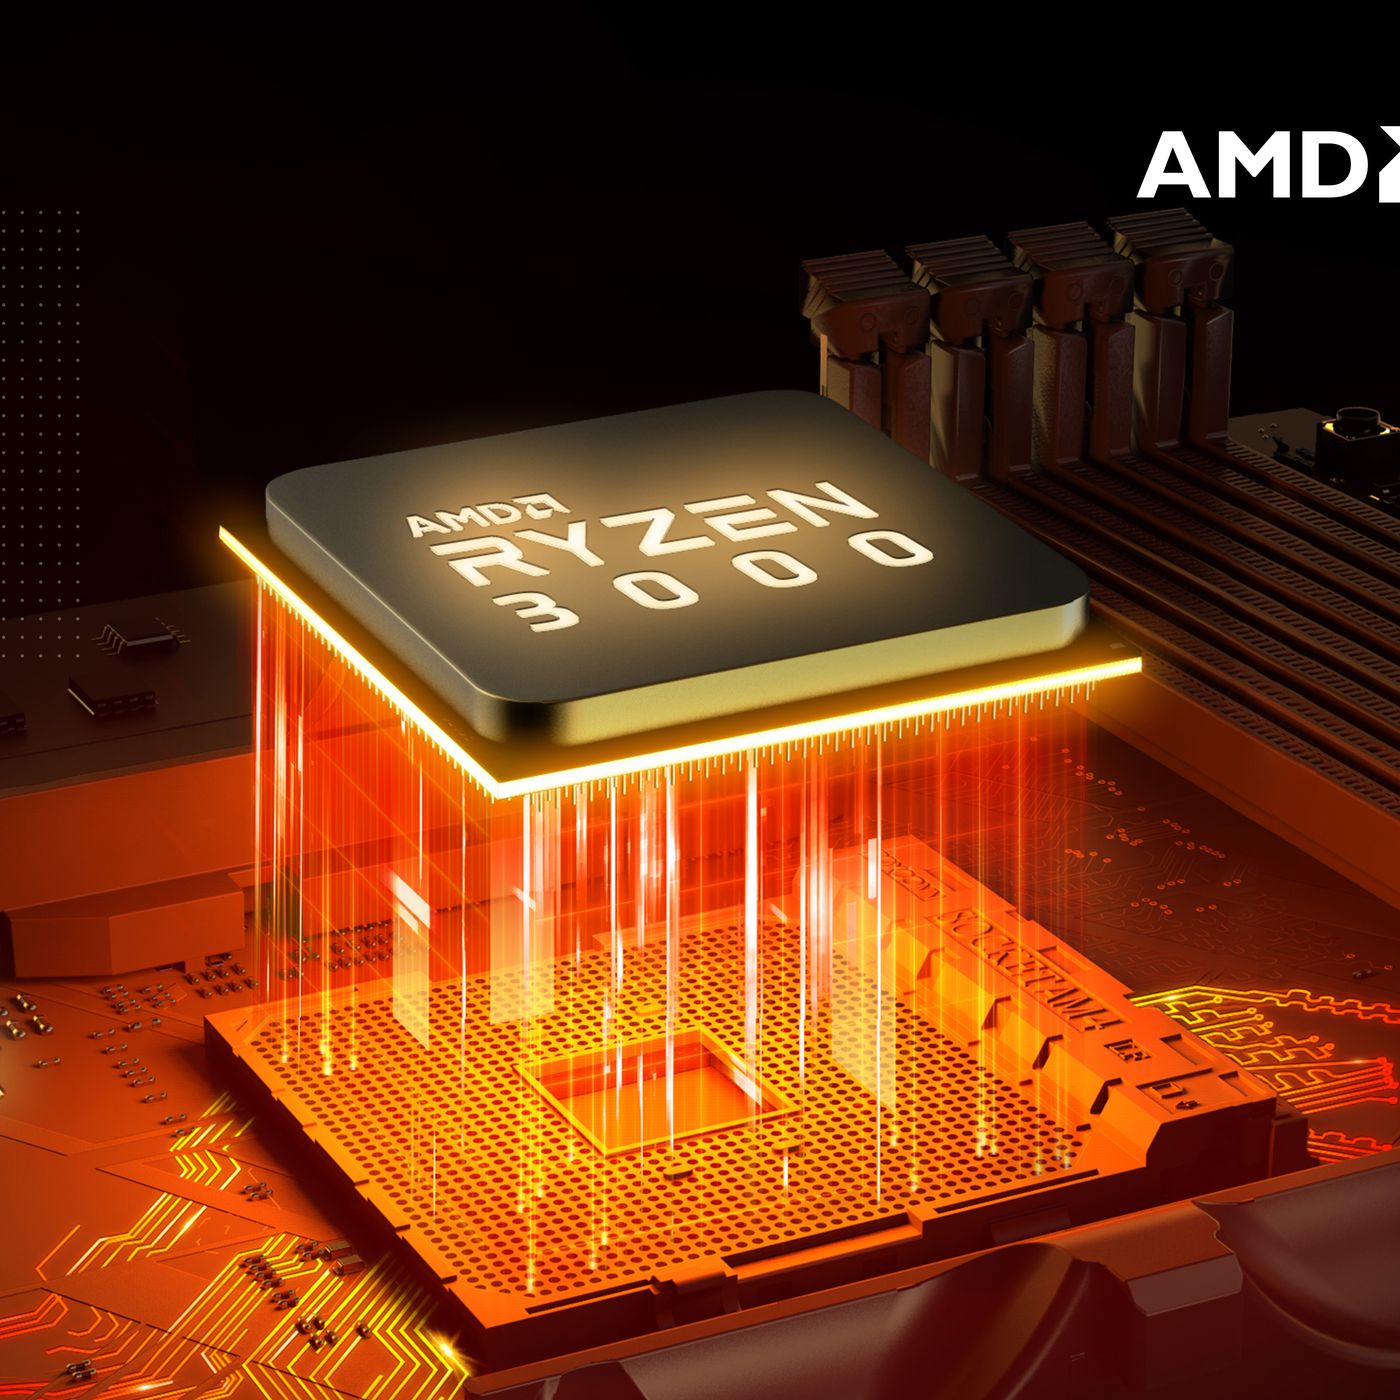 AMD is releasing its Ryzen CPUs on 7/7 - The Verge